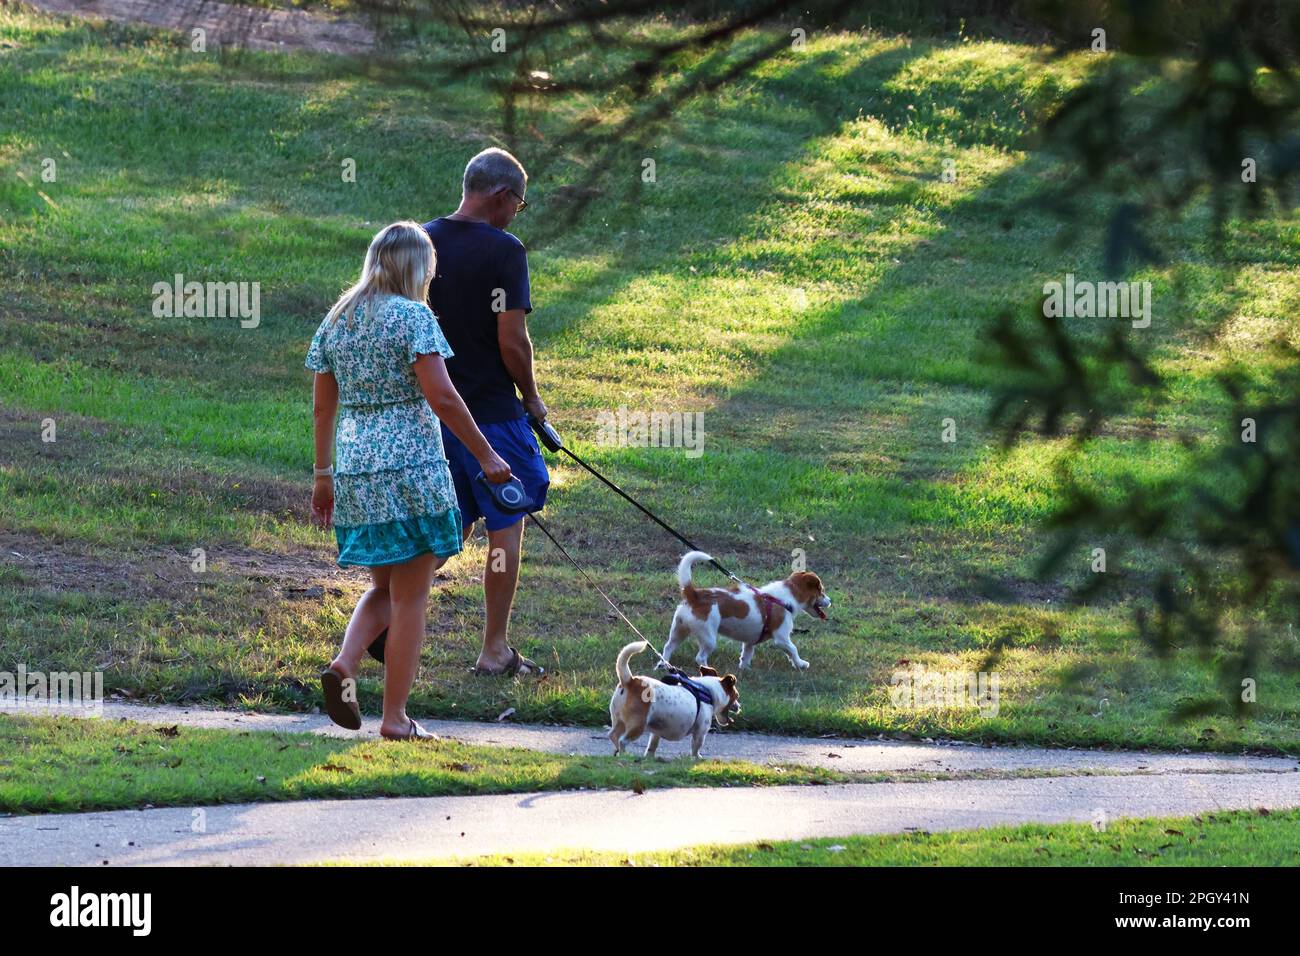 Photo of people doing things at the park together. Stock Photo